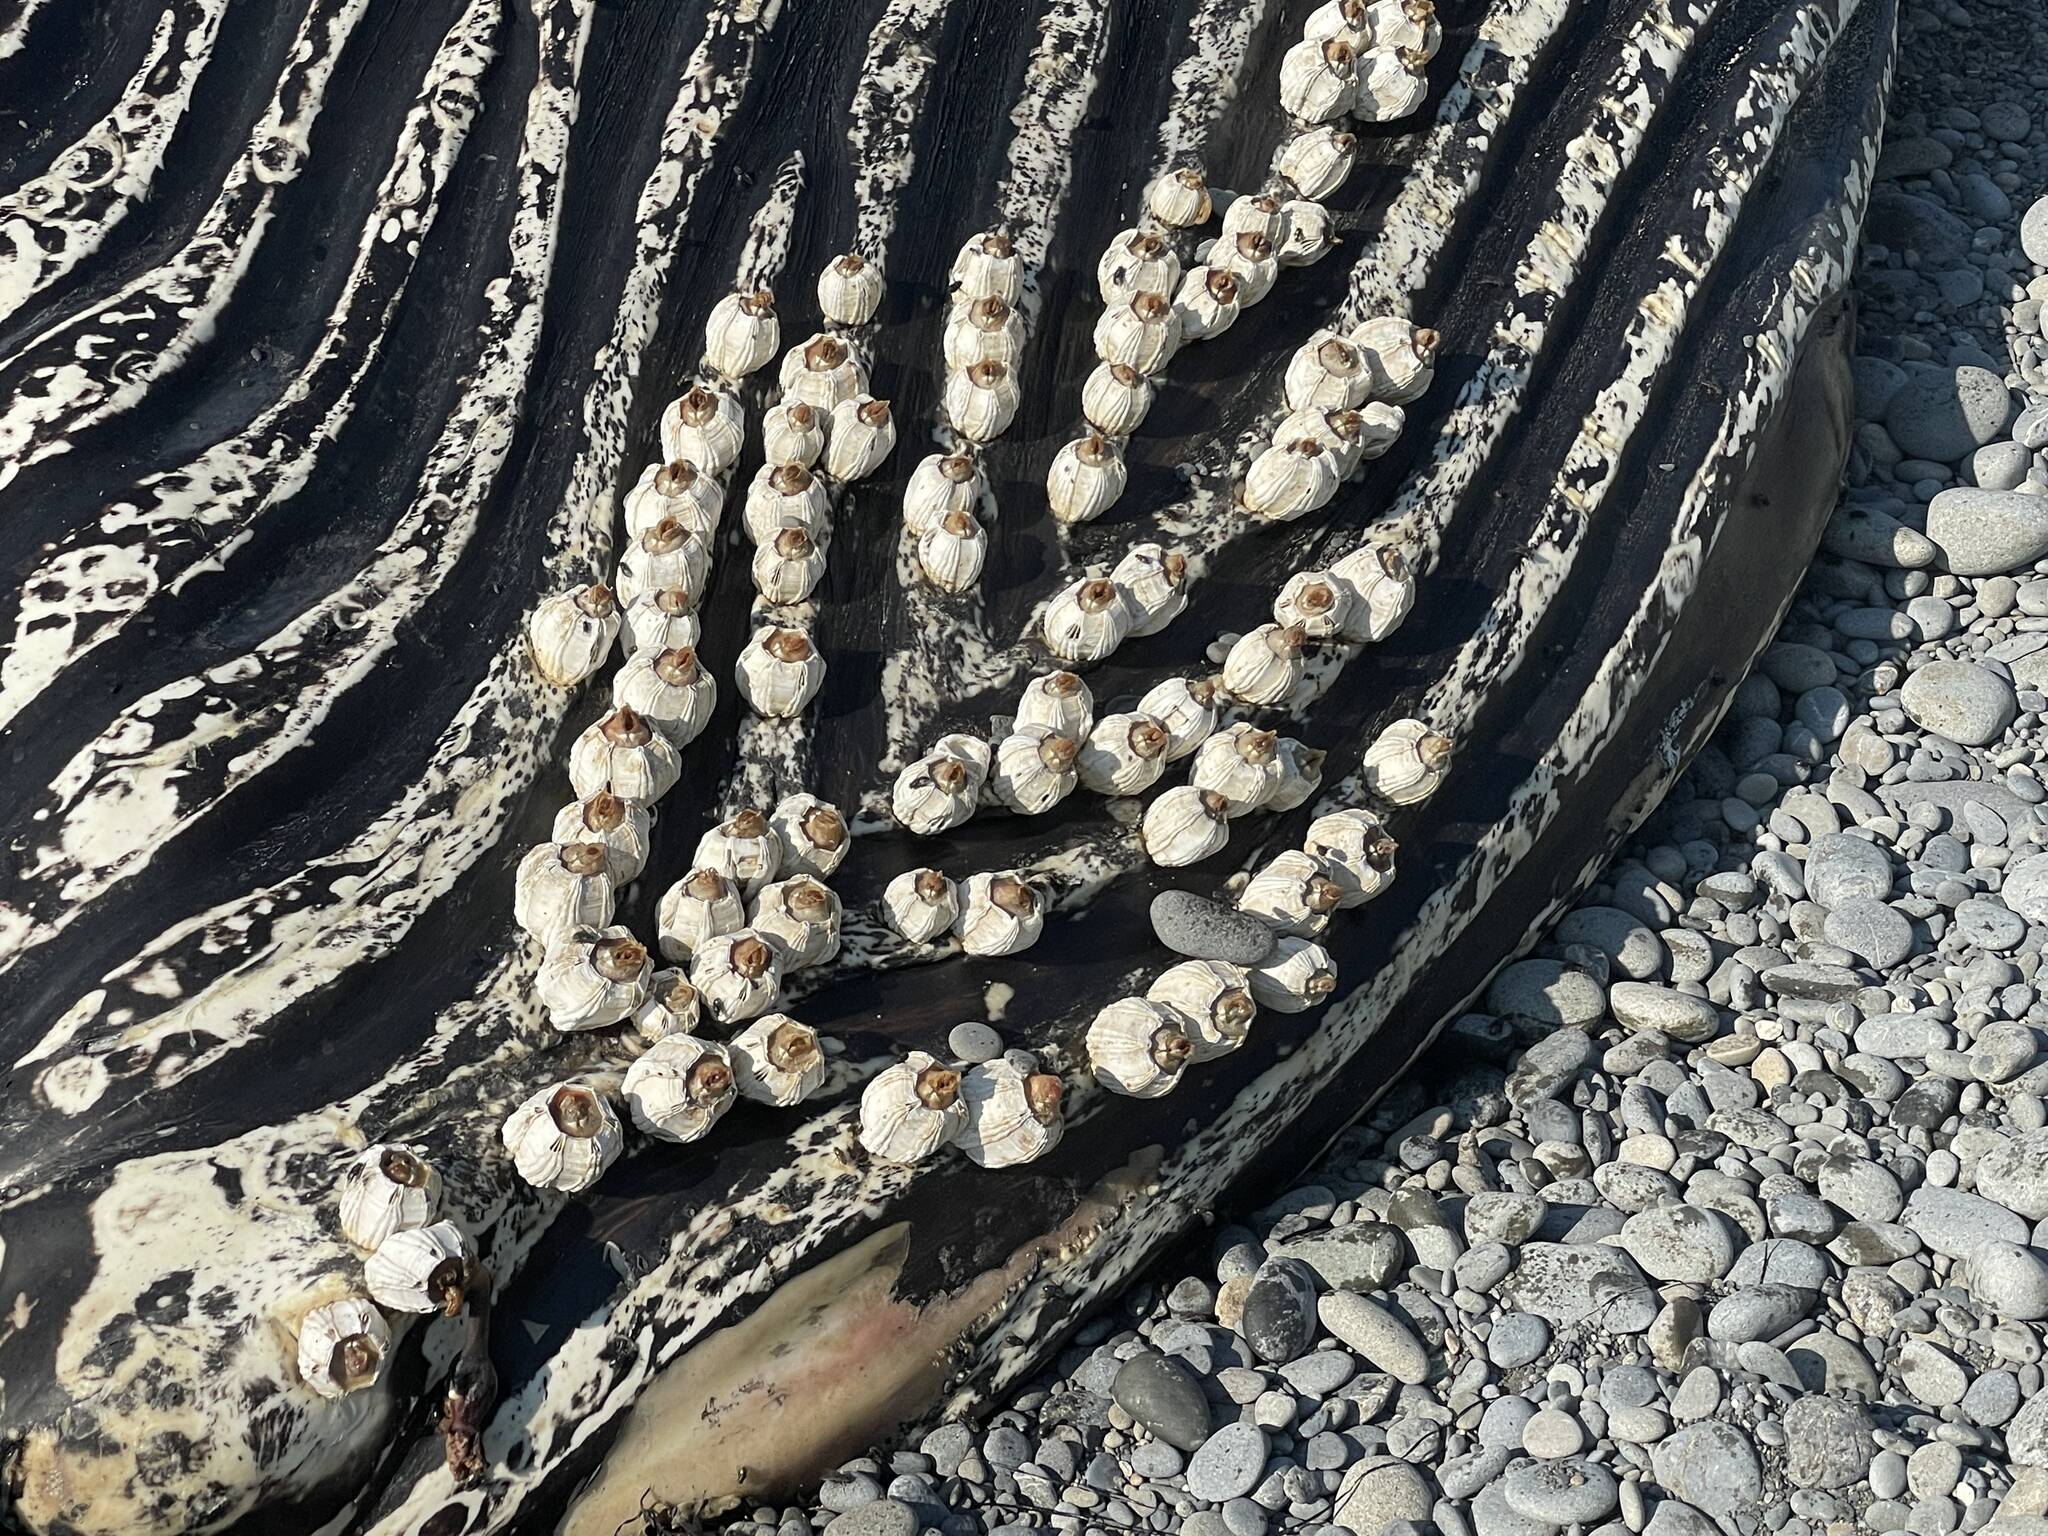 Barnacles are visible on the corpse of a humpback whale that washed ashore near Ruby Beach around Oct. 5. (Michael S. Lockett | The Daily World)